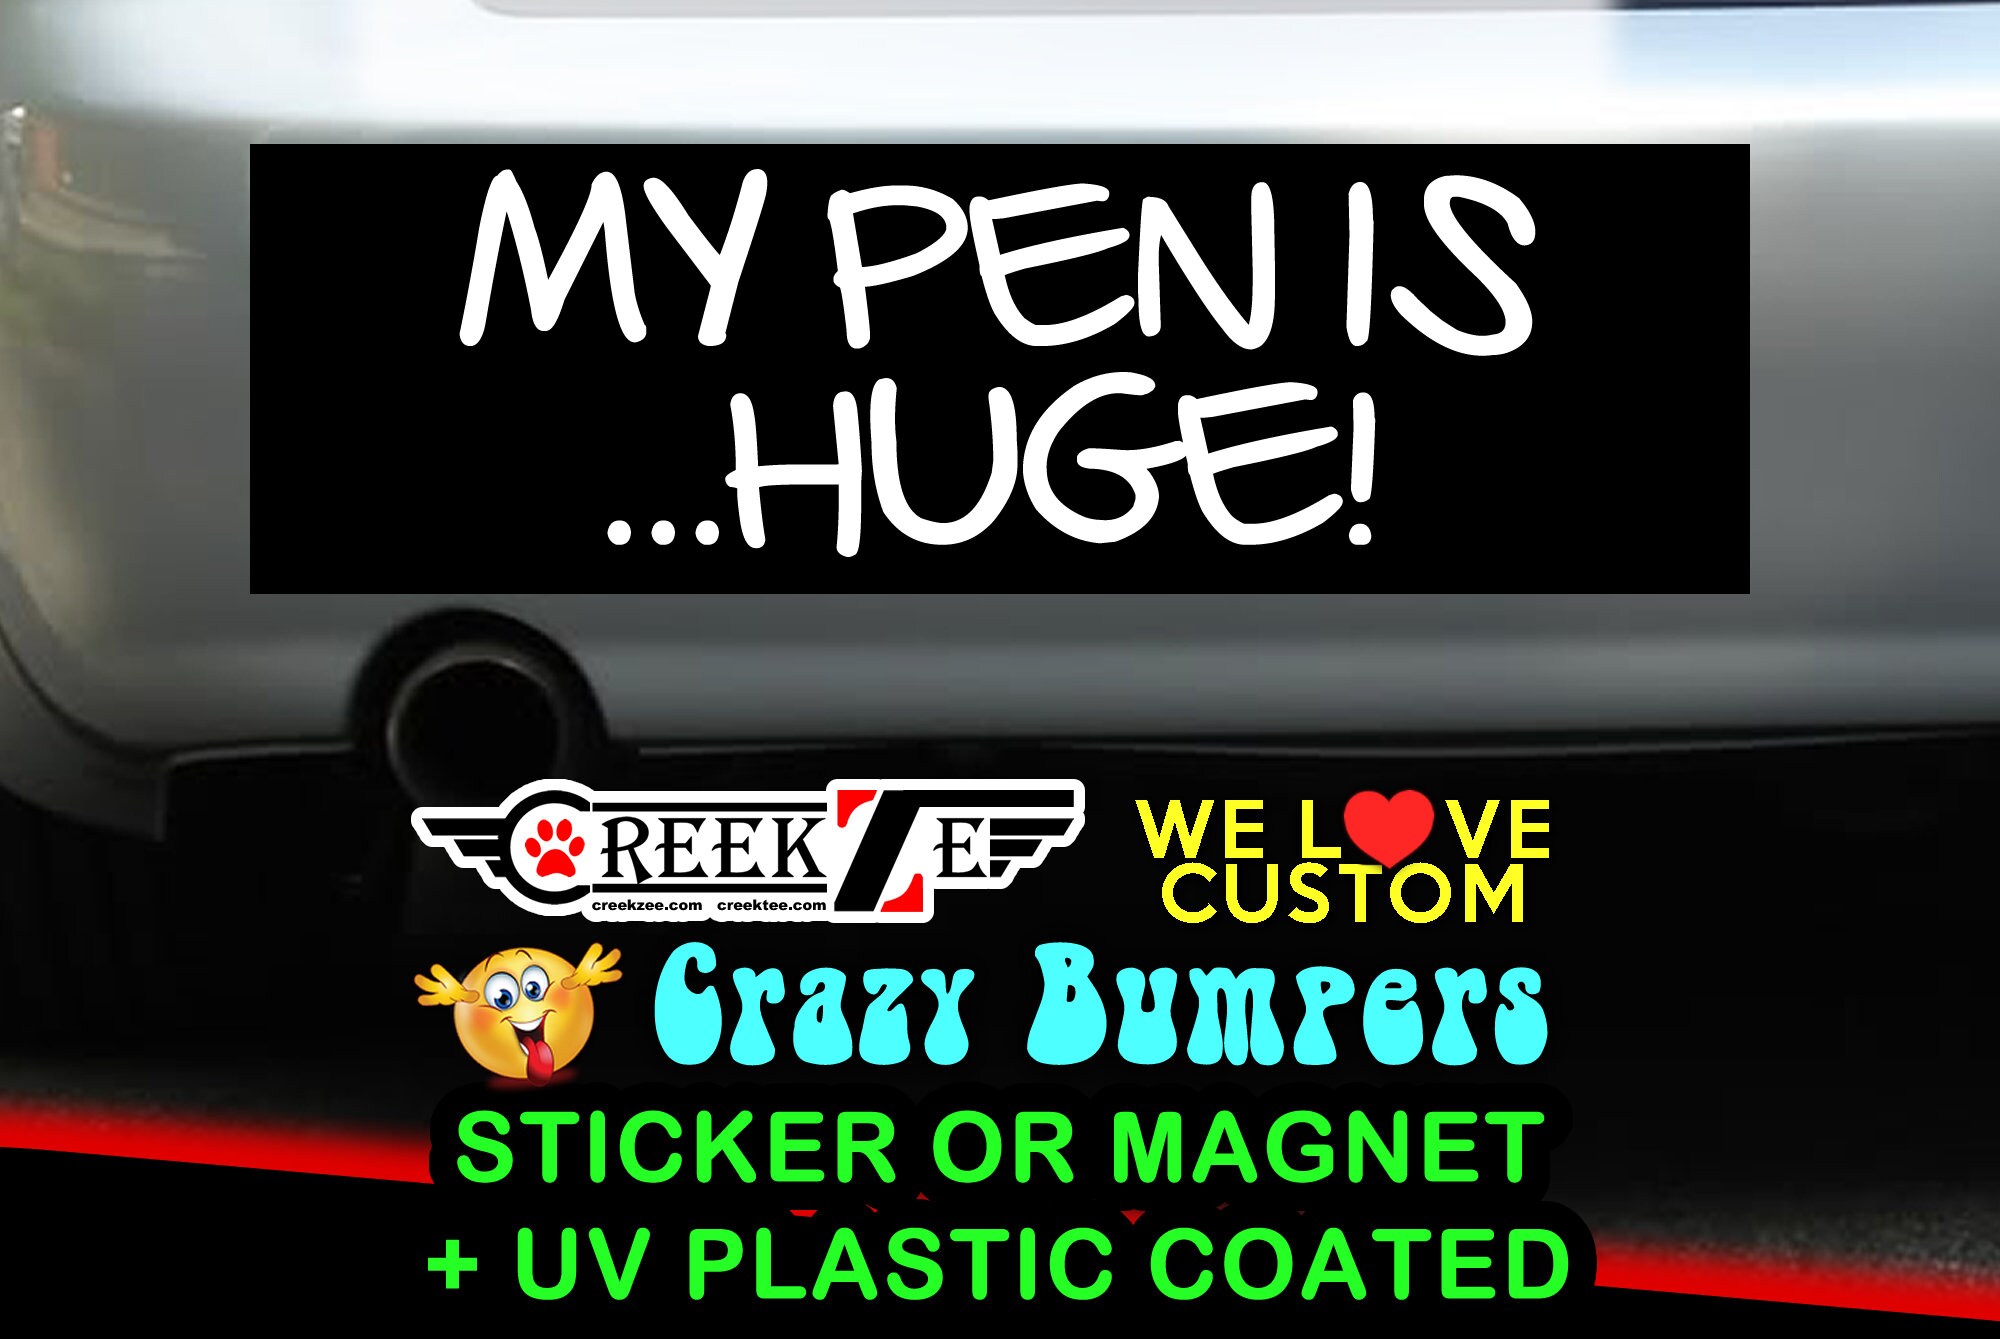 MY PEN (penis) IS Huge Bumper Sticker or Magnet in new sizes, 4